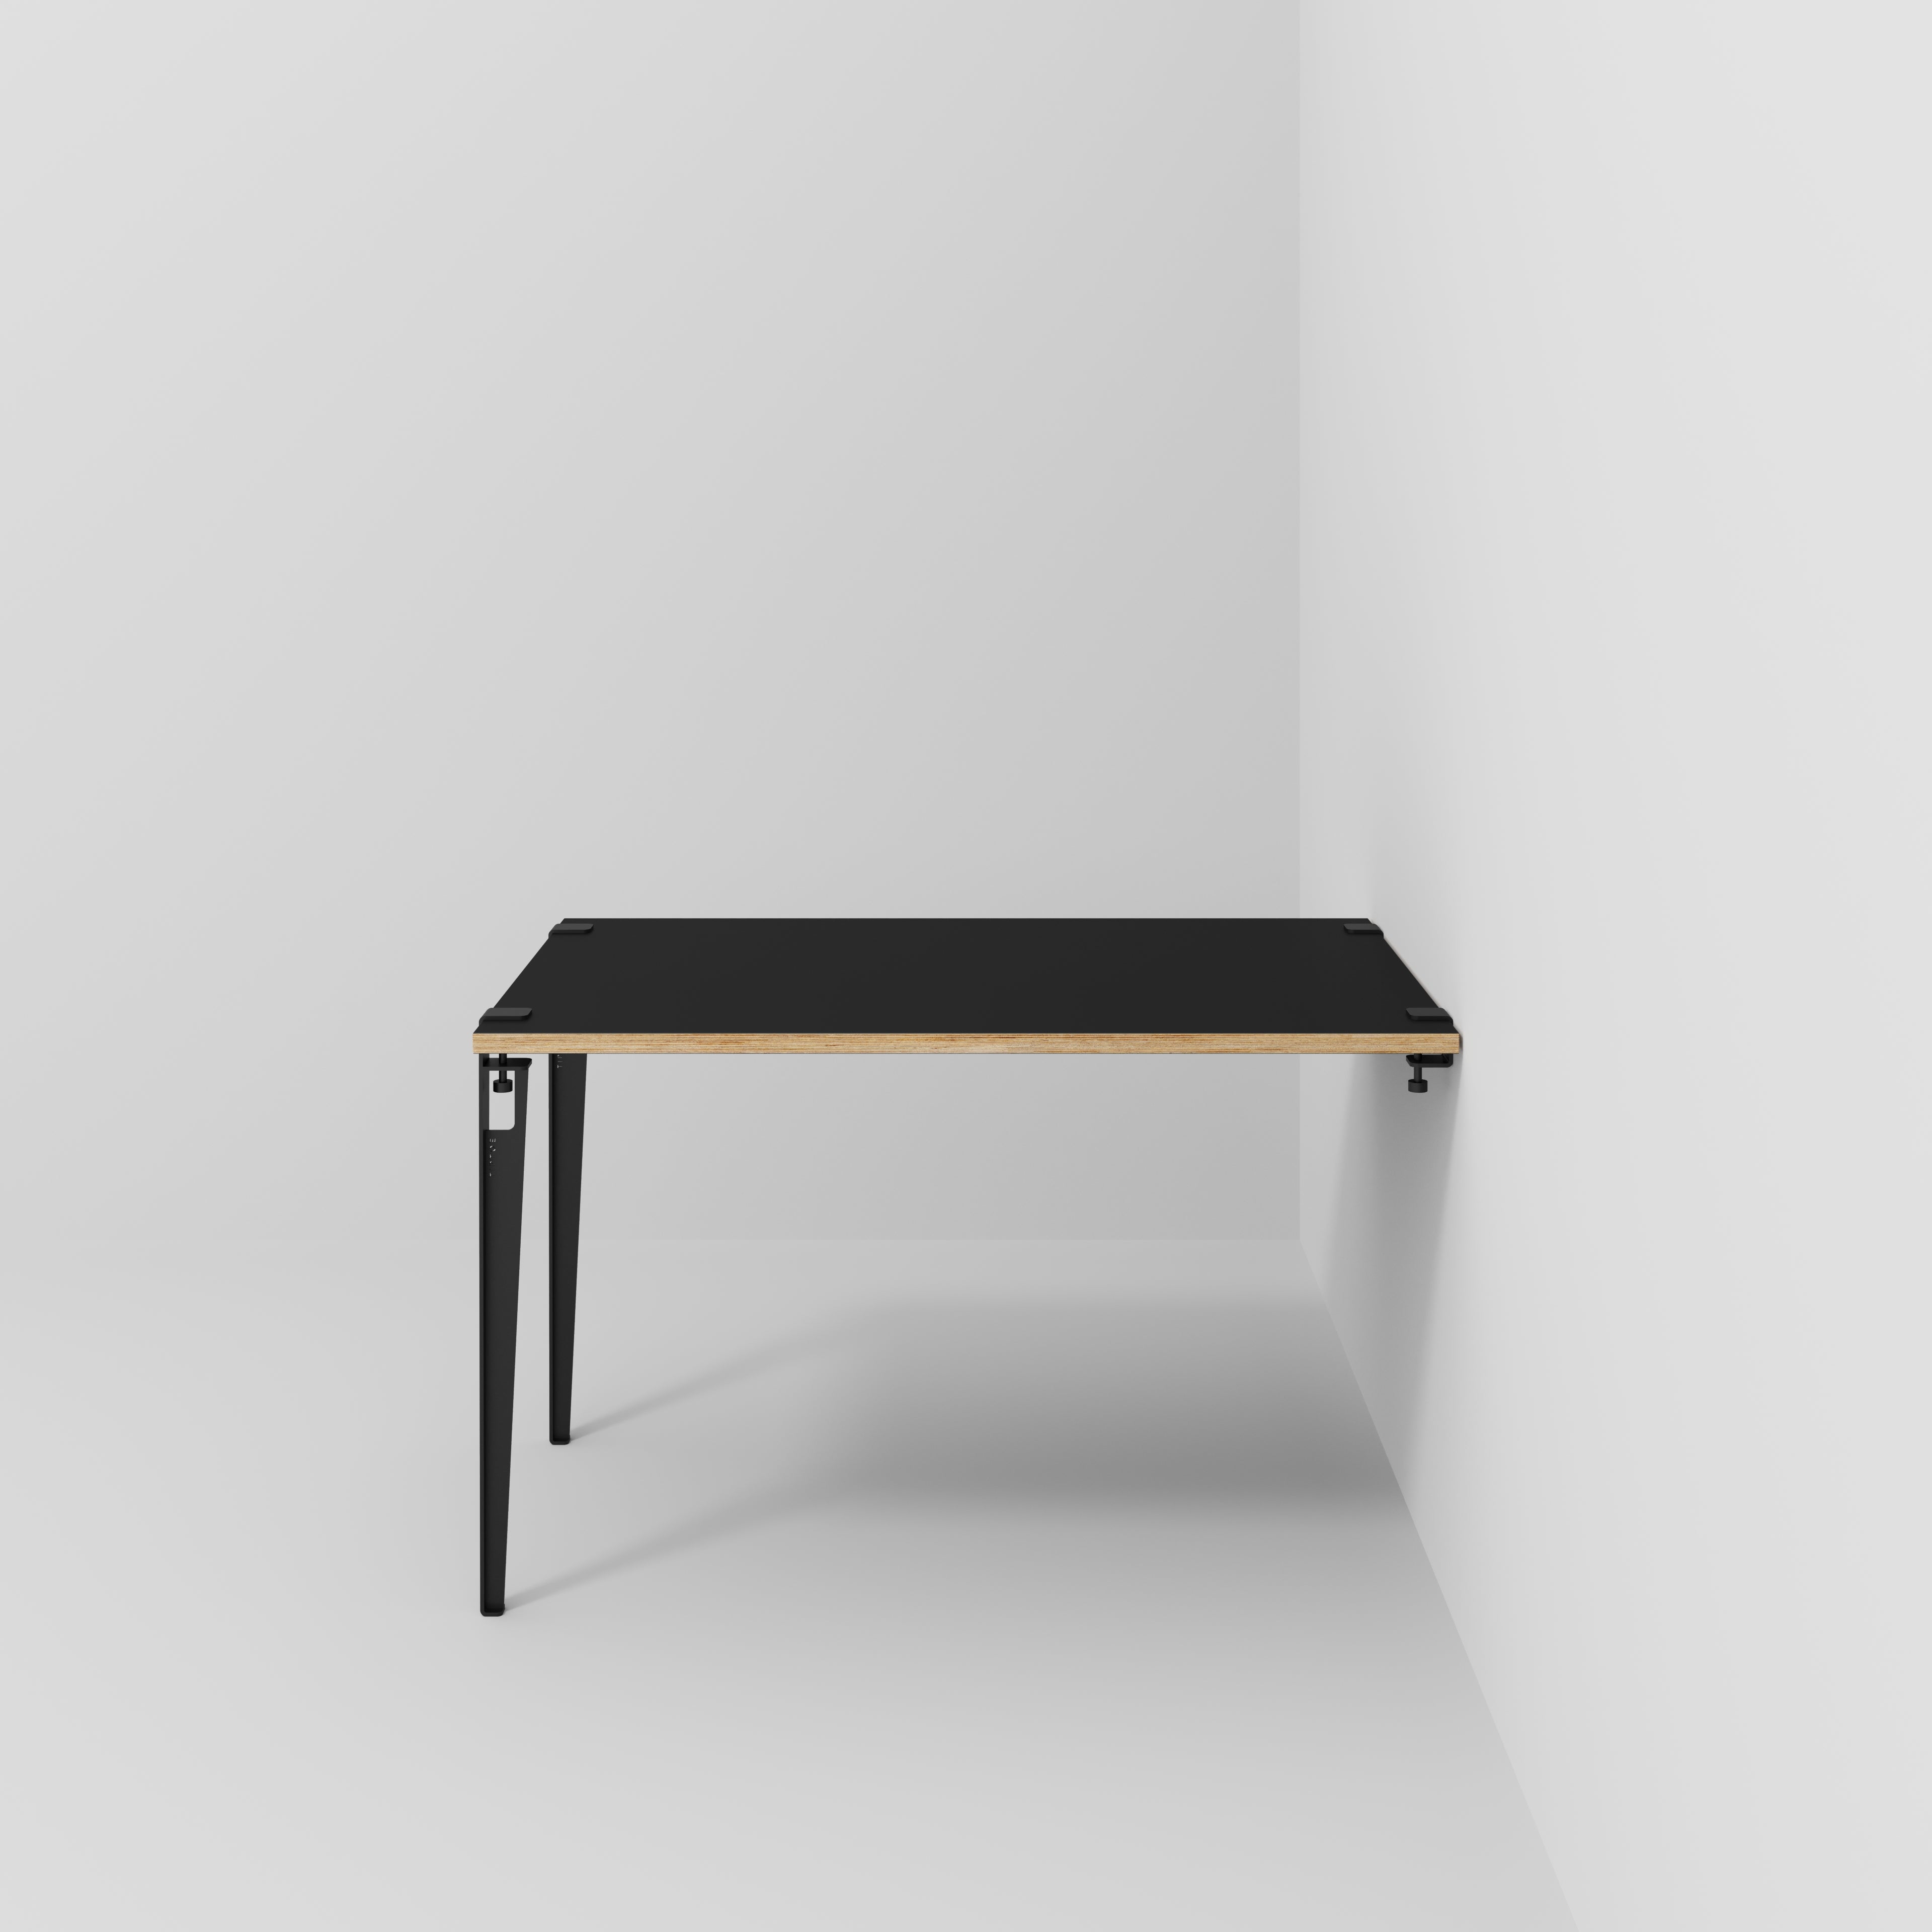 Wall Table with Black Tiptoe Legs and Brackets - Formica Diamond Black - 1200(w) x 800(d) x 750(h)